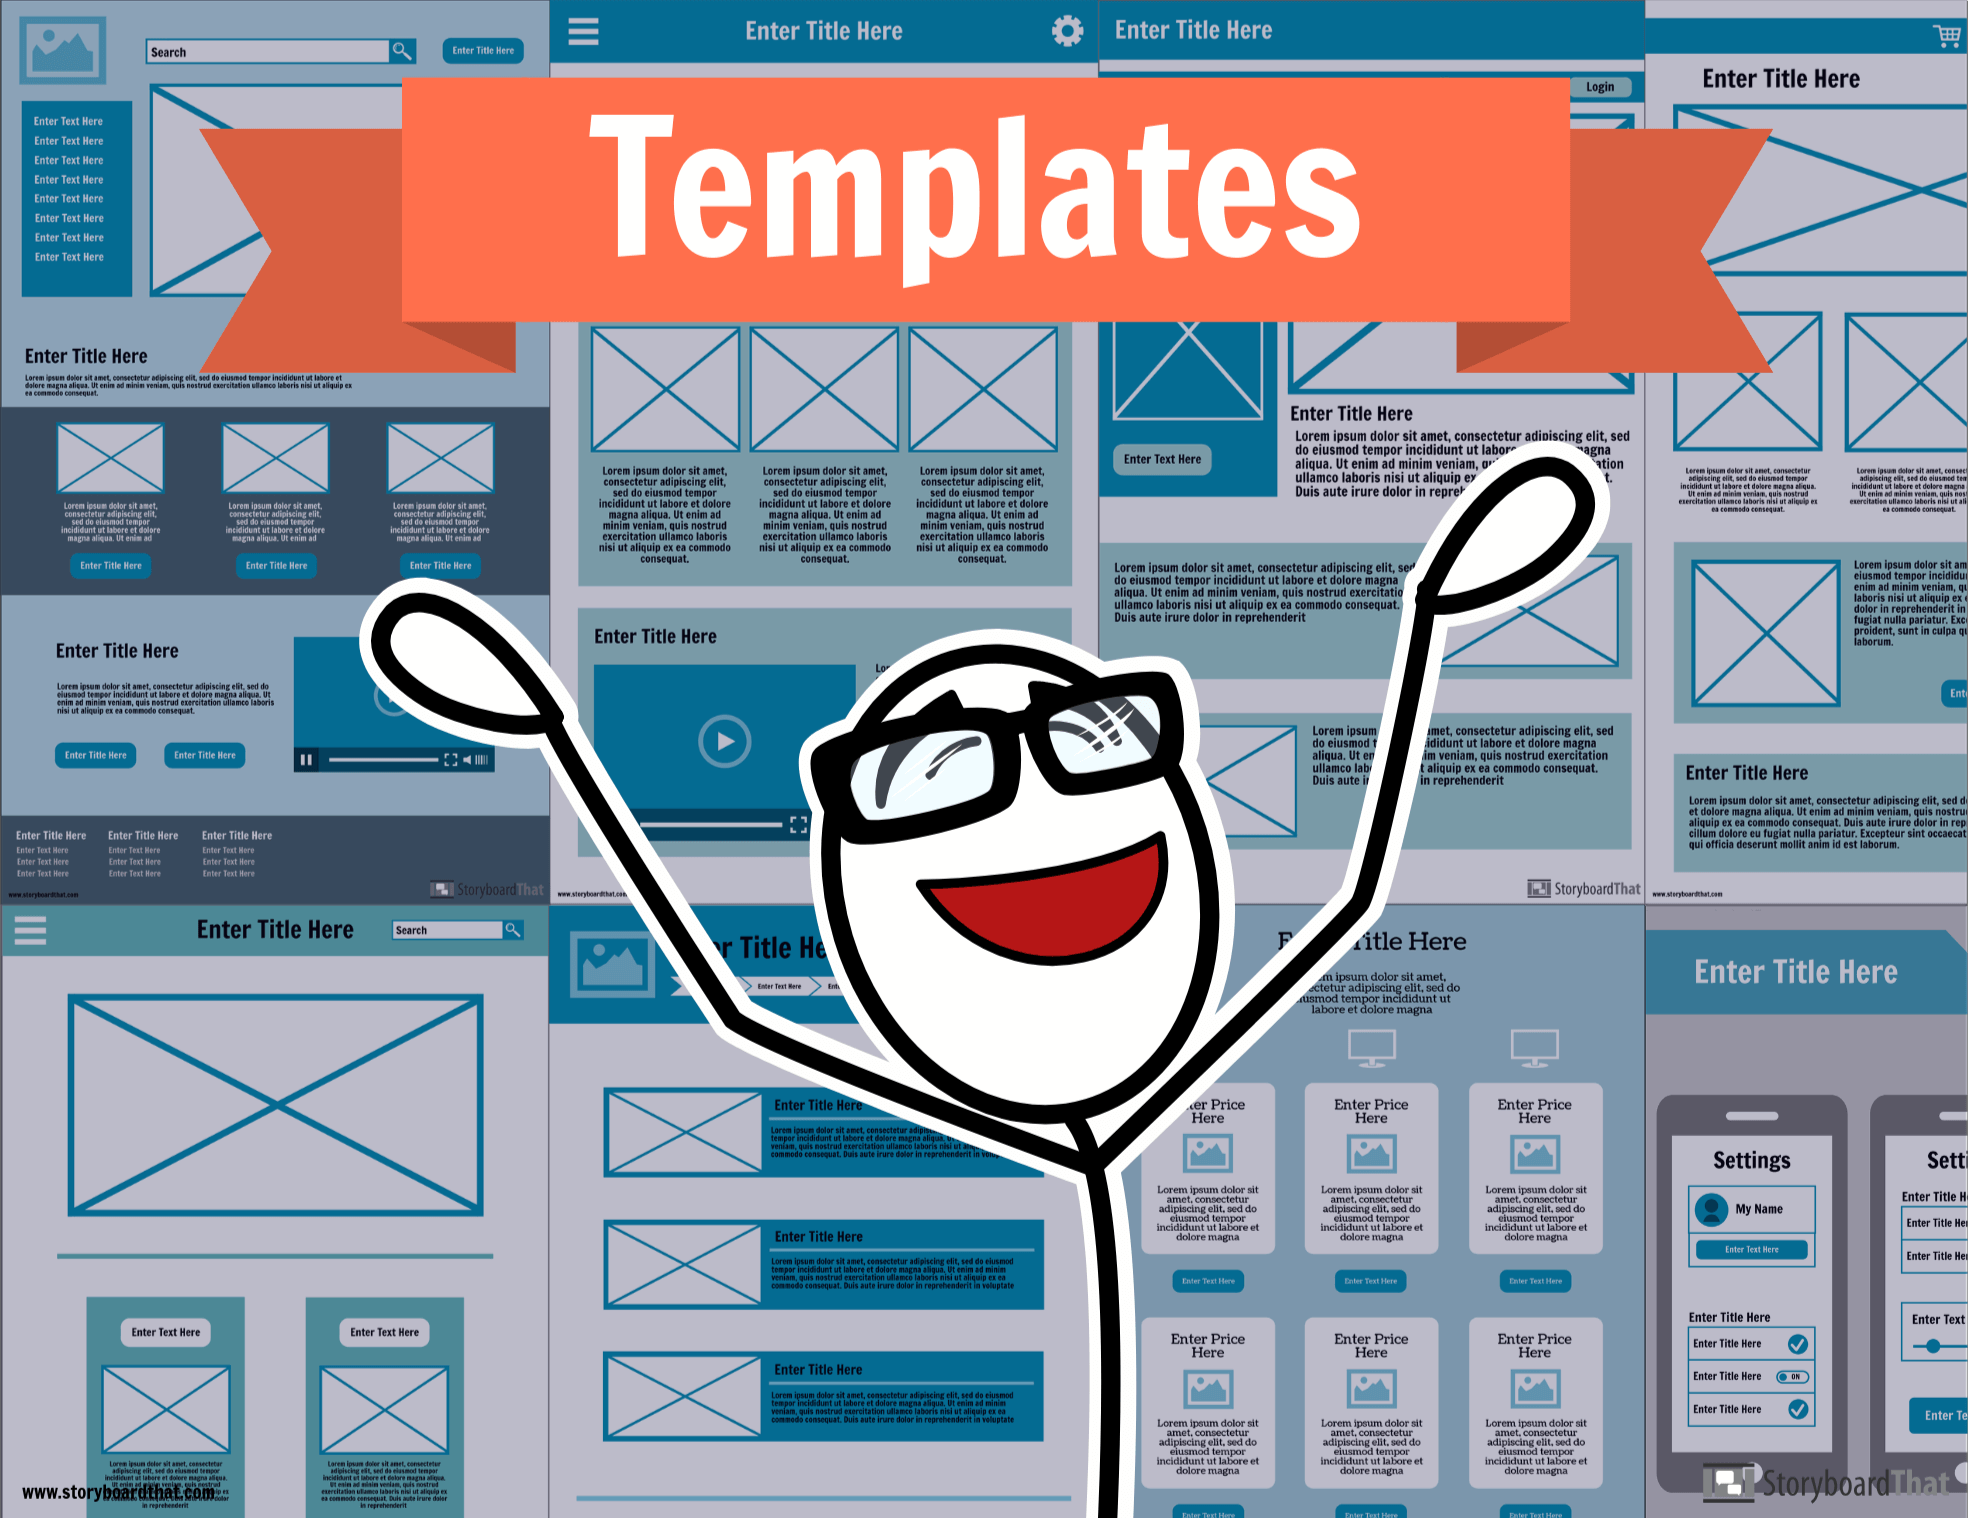 Download FREE Wireframe Creator and Tool | Wireframe Templates and Examples